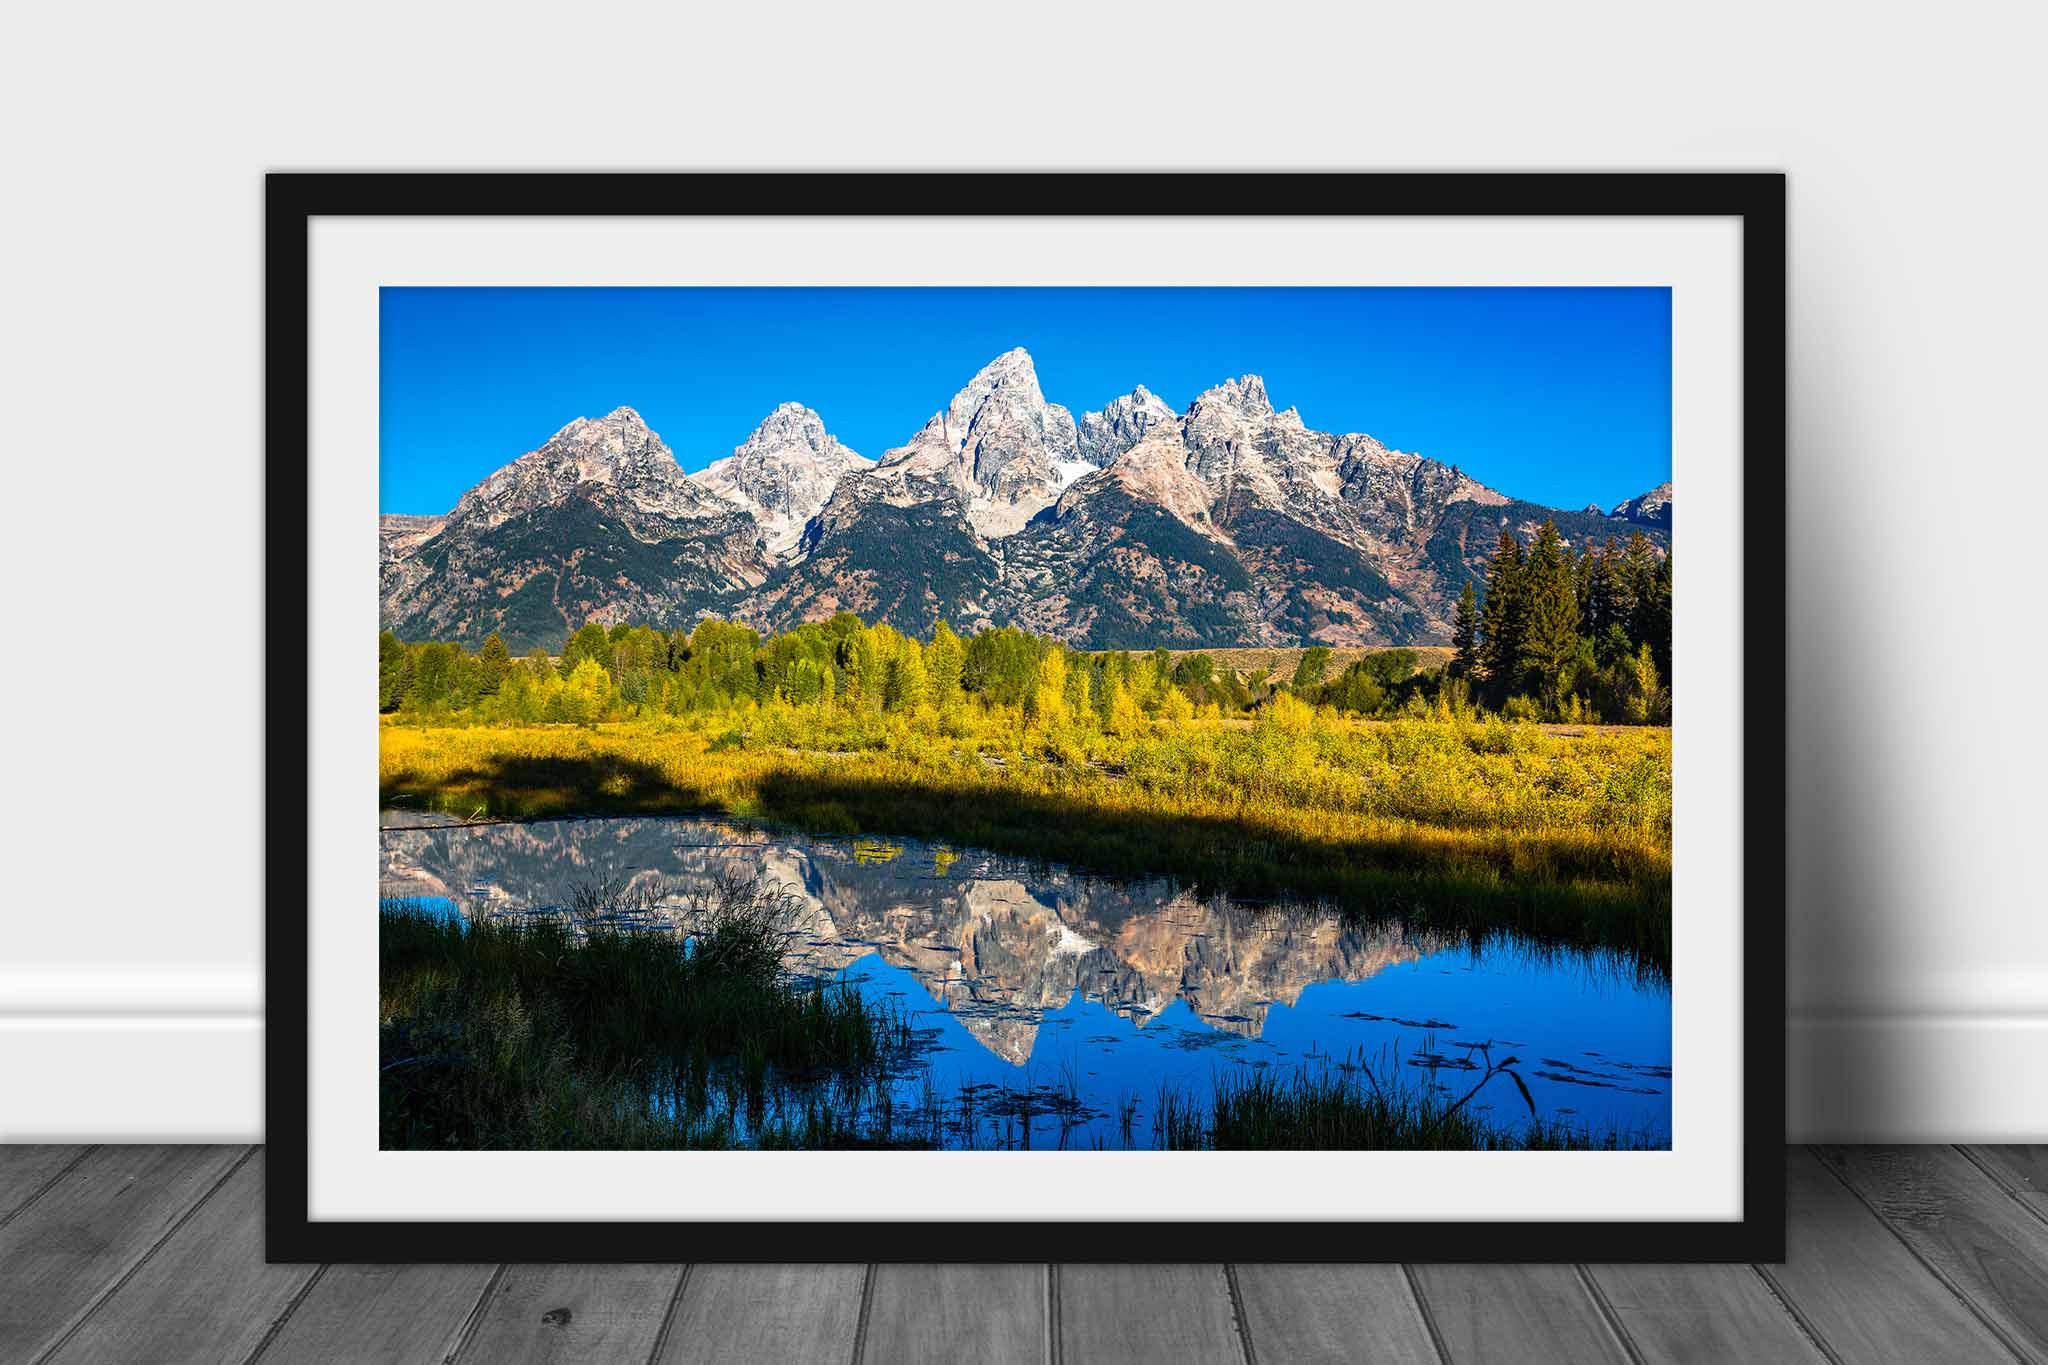 Framed Rocky Mountain print of Grand Teton reflecting off the water at Schwabacher's Landing on an autumn day in Grand Teton National Park, Wyoming by Sean Ramsey of Southern Plains Photography.